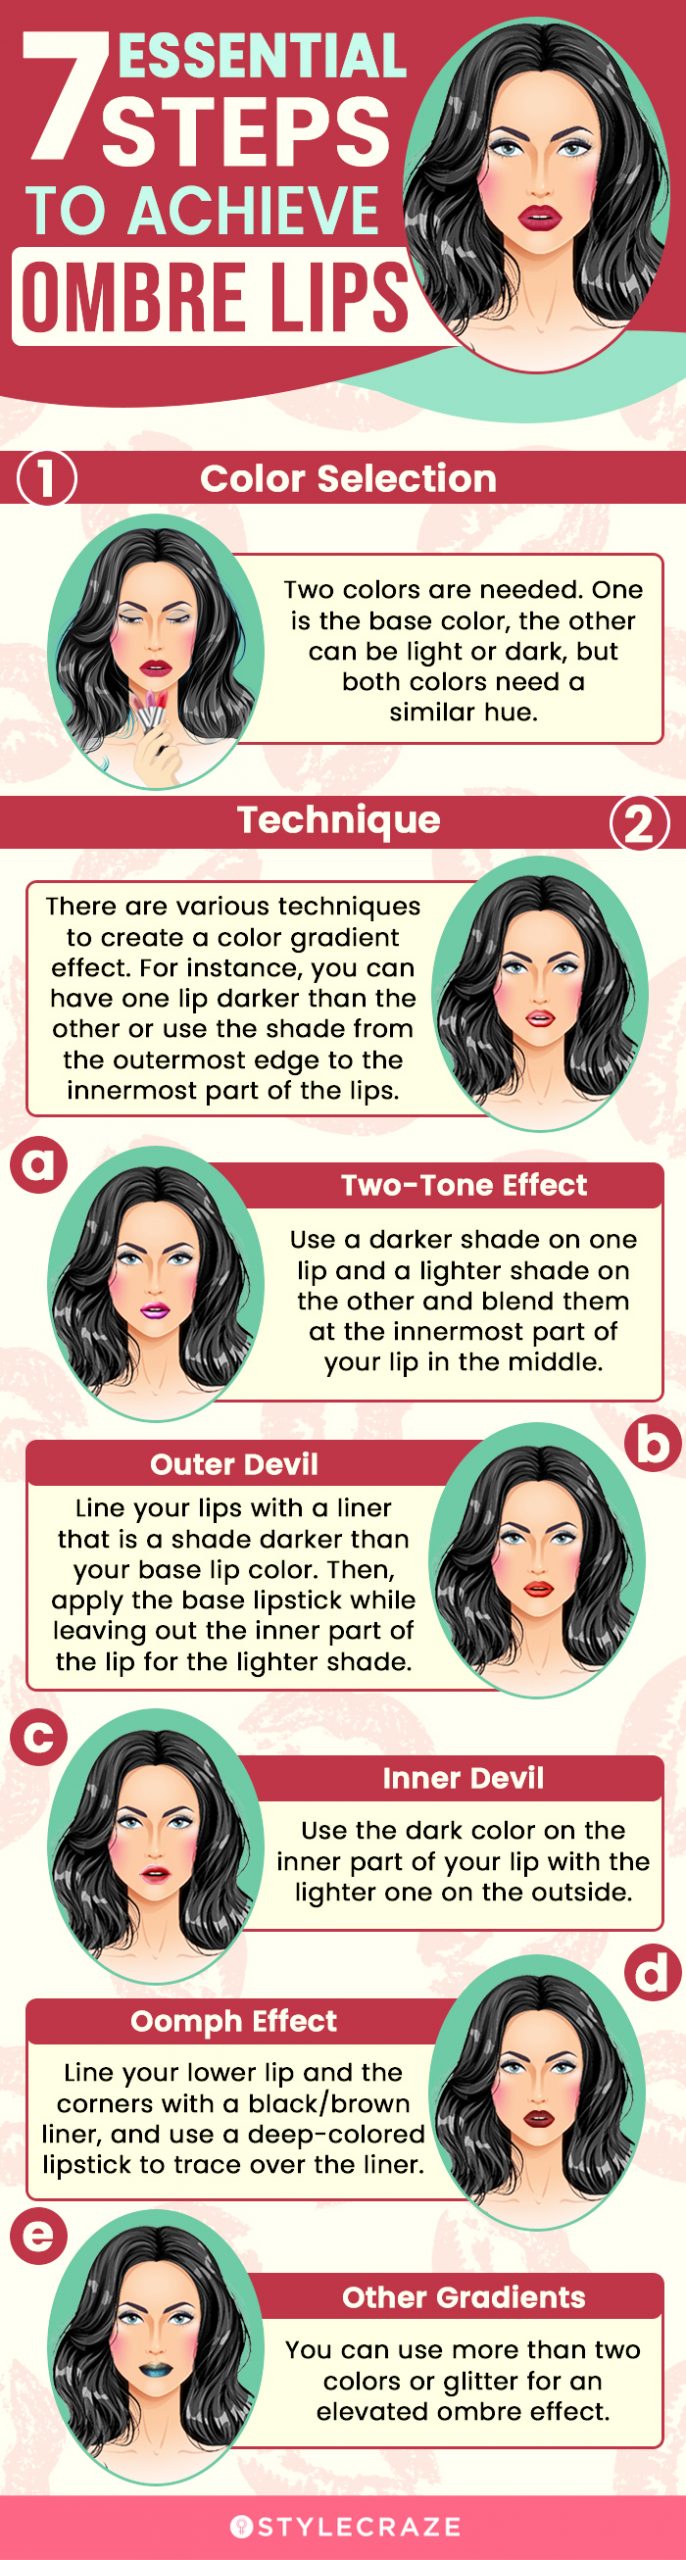 Ombre Lips: A Step-by-Step Guide By Stylish.ae Experts